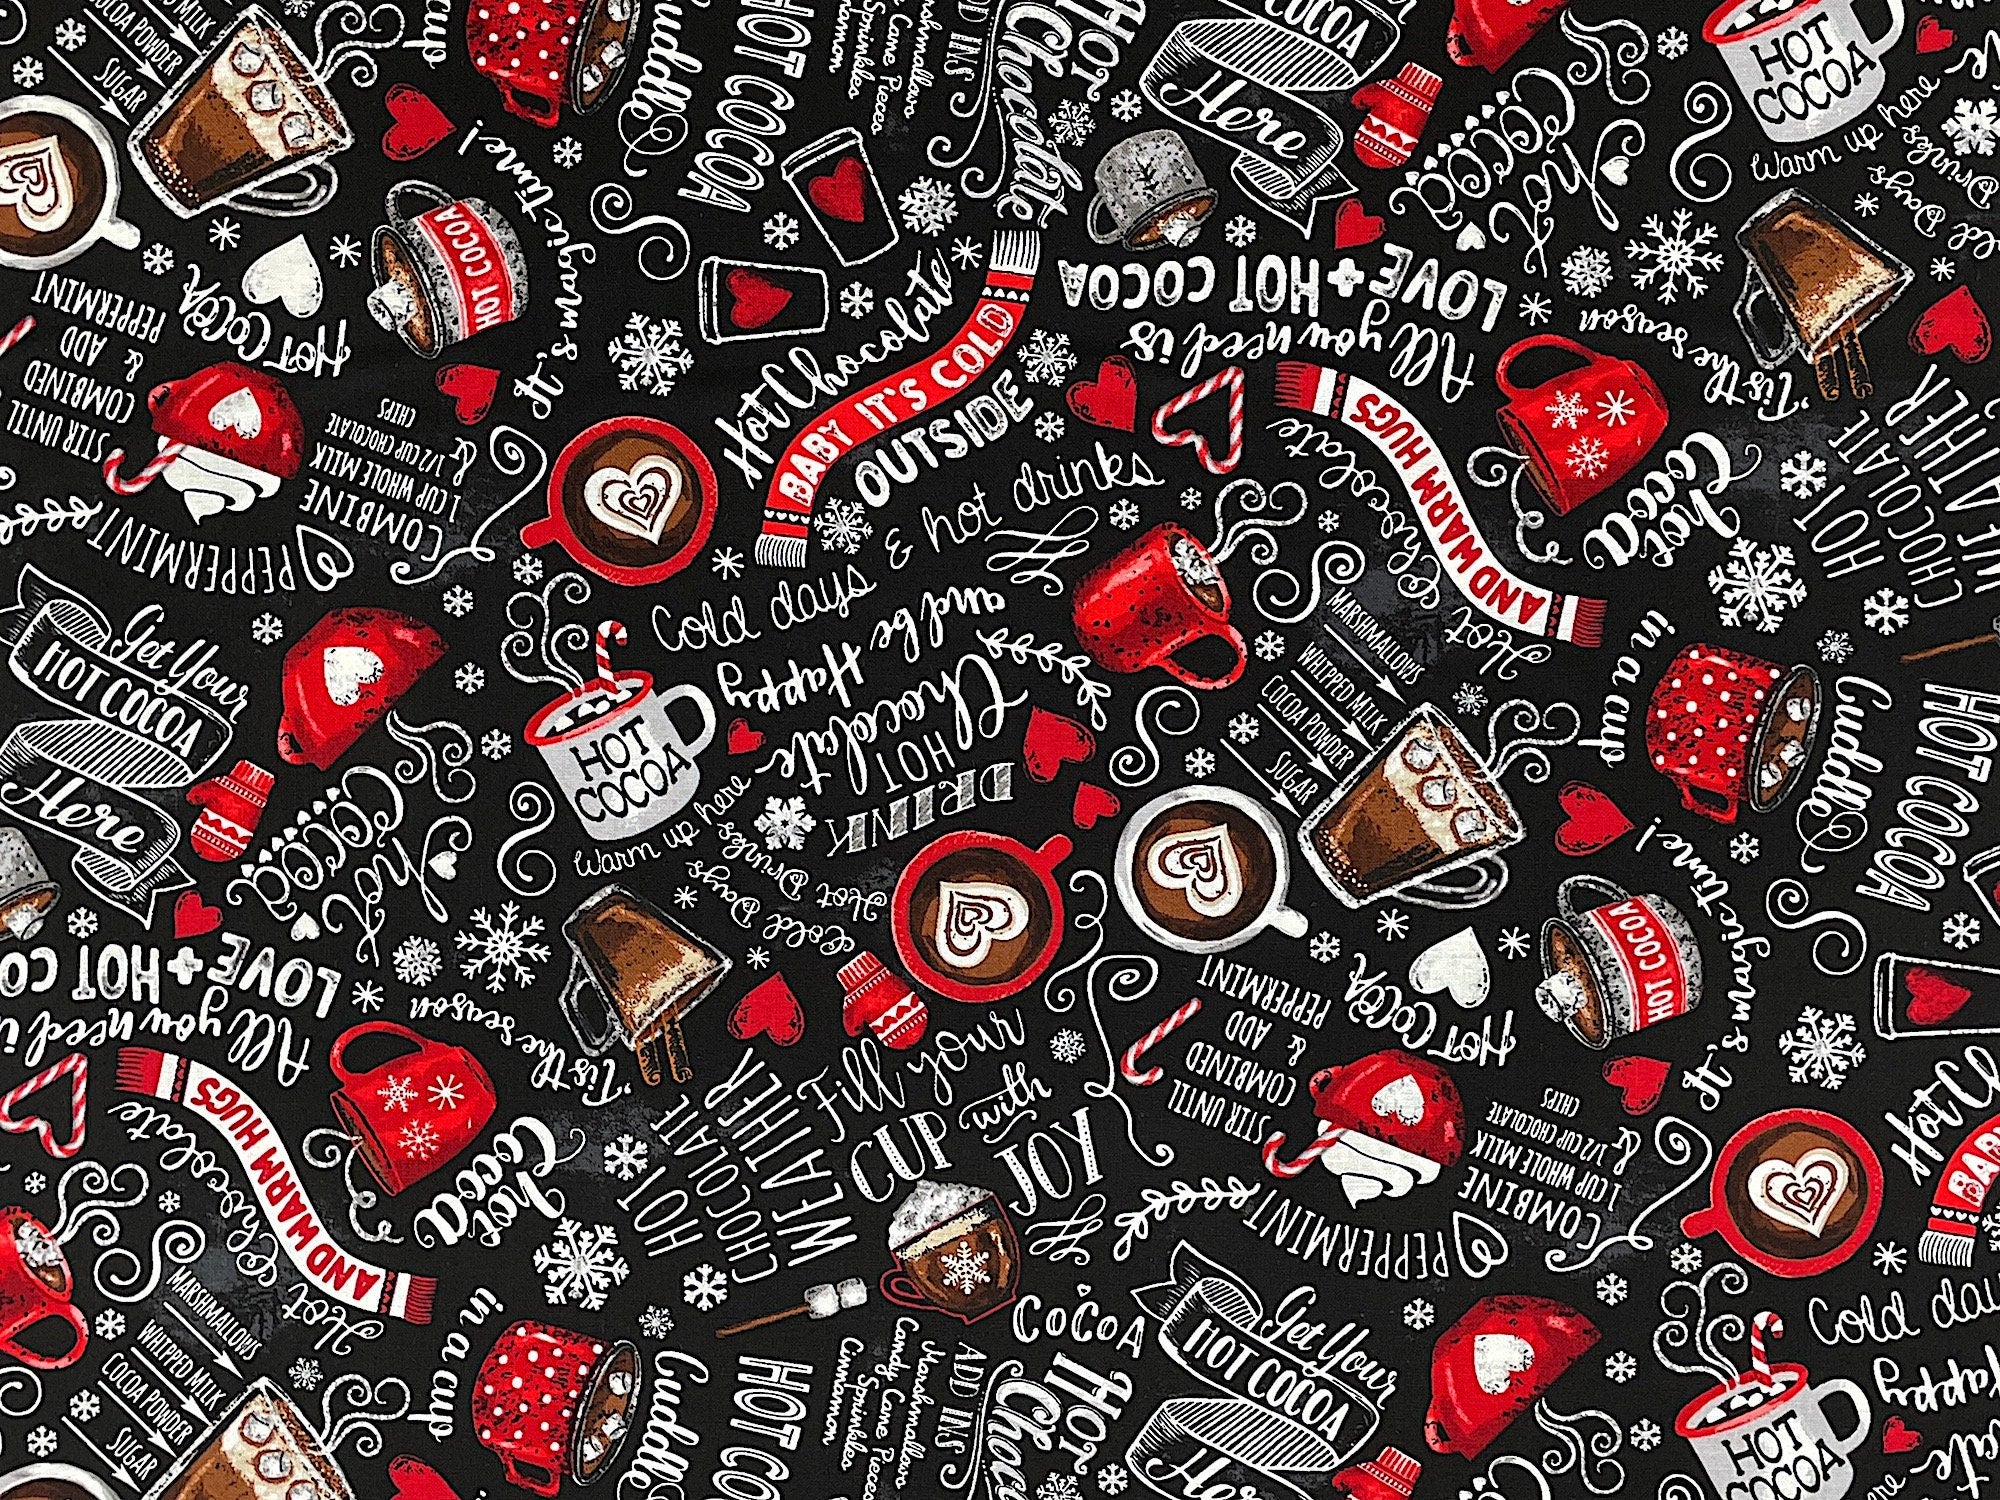 This black cotton fabric is covered with cups of hot cocoa and sayings. Some of the sayings are baby it's cold outside, hot chocolate weather, hot cocoa, cold days & hot drinks and more.